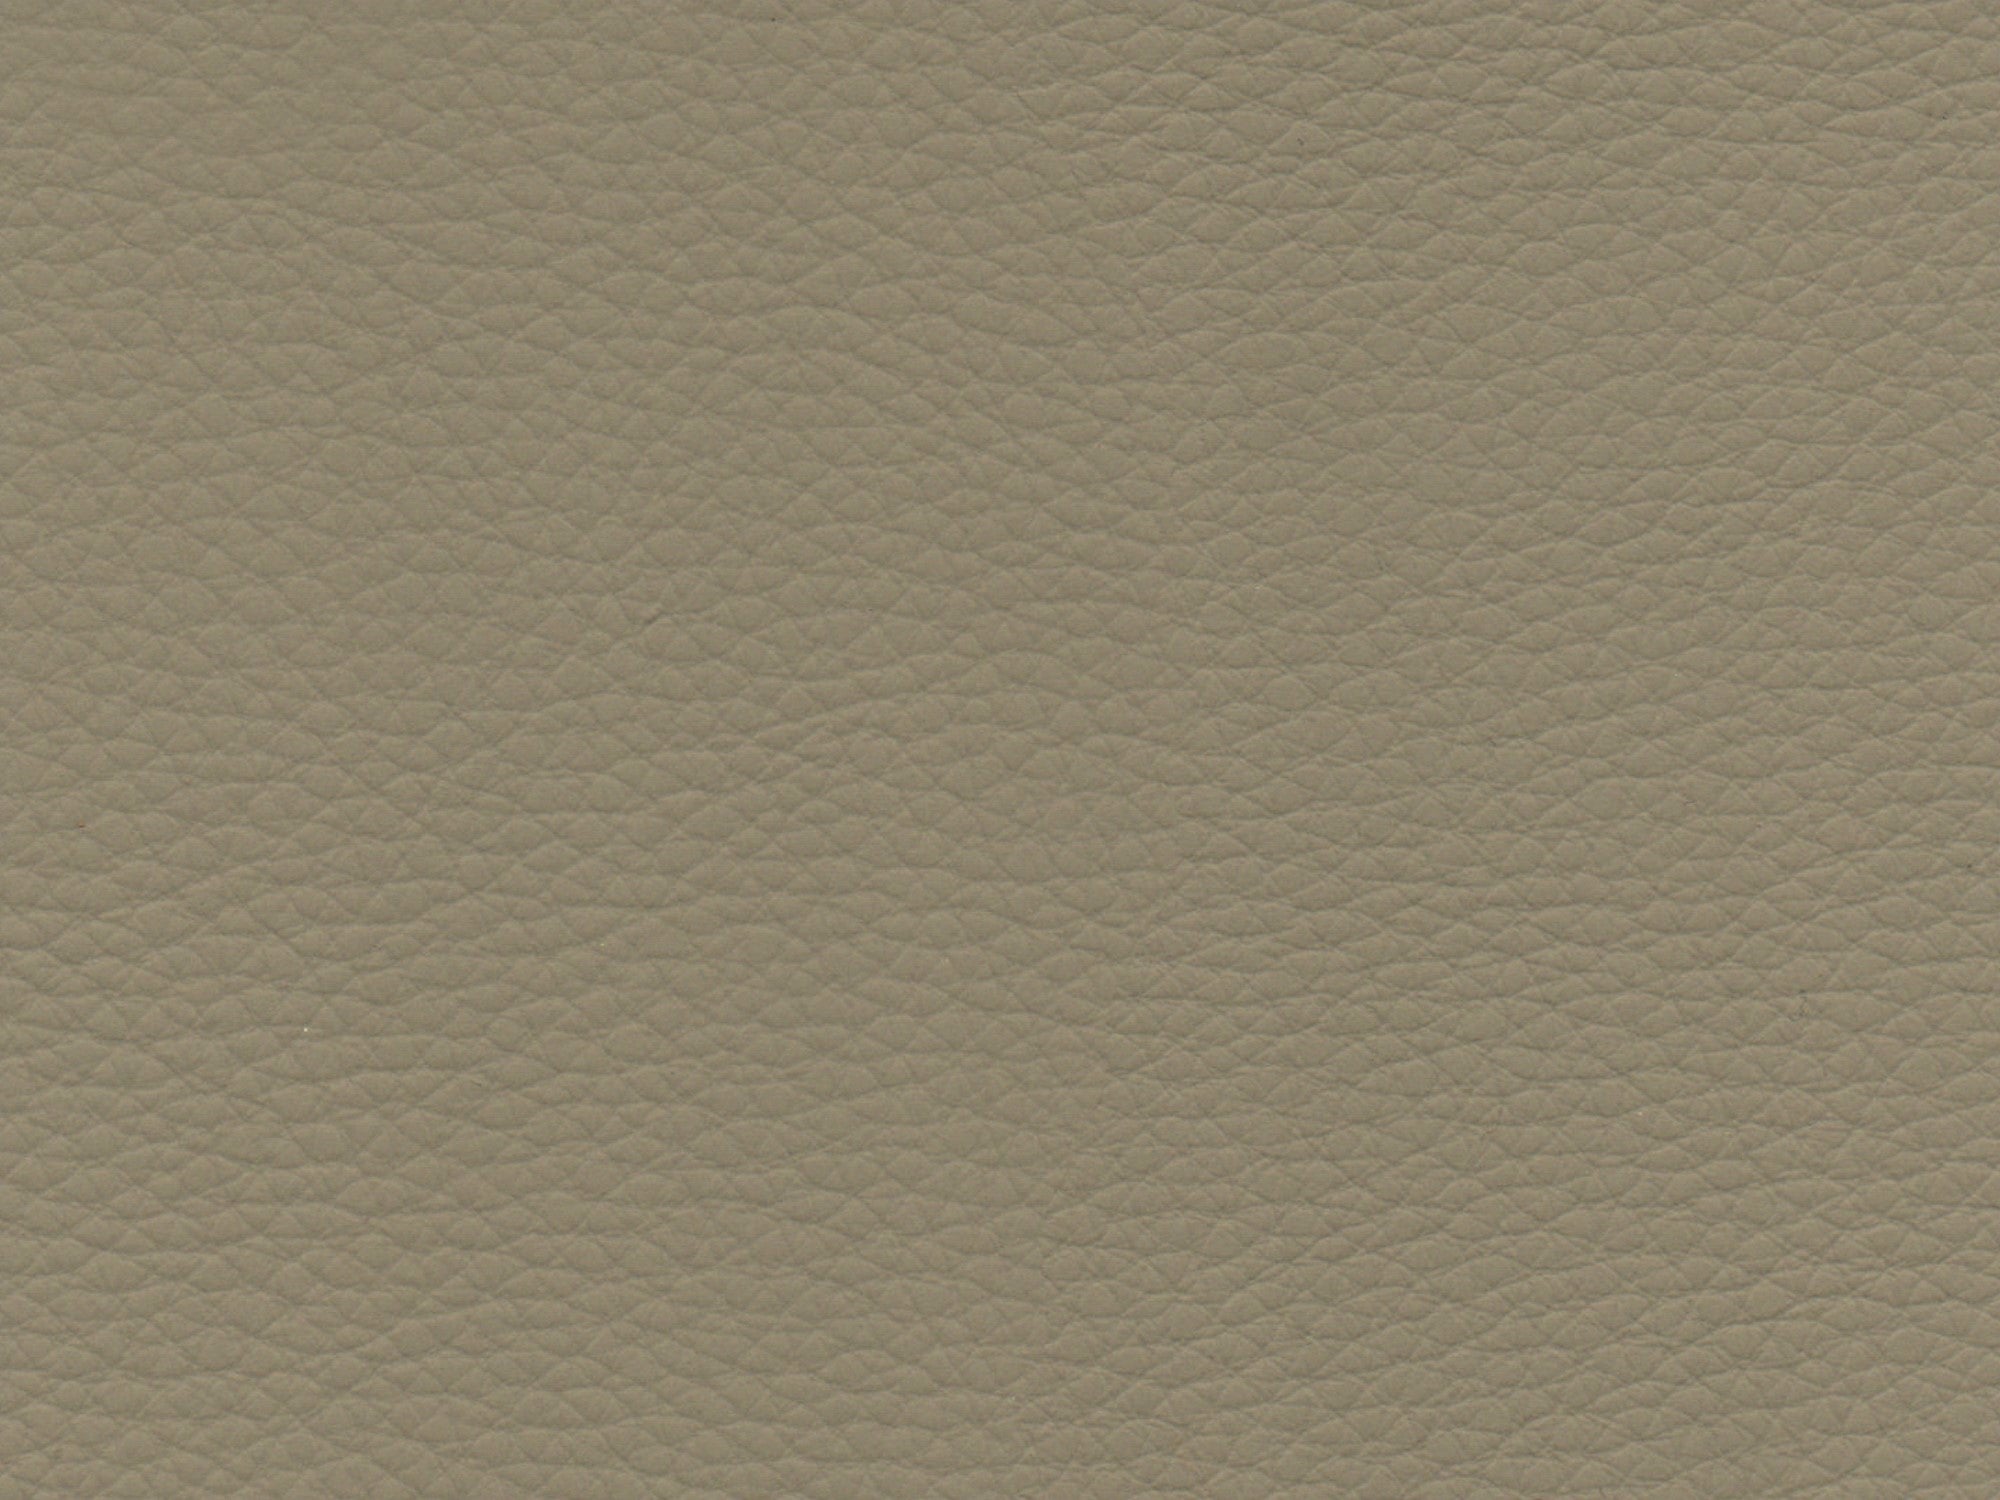 Luxury Faux Leather, Solid Vinyl, Vegan Pleather, Faux Full Grain Cow Hide  Leather, Plain Artificial Leather for Bags, Garments, Upholstery 